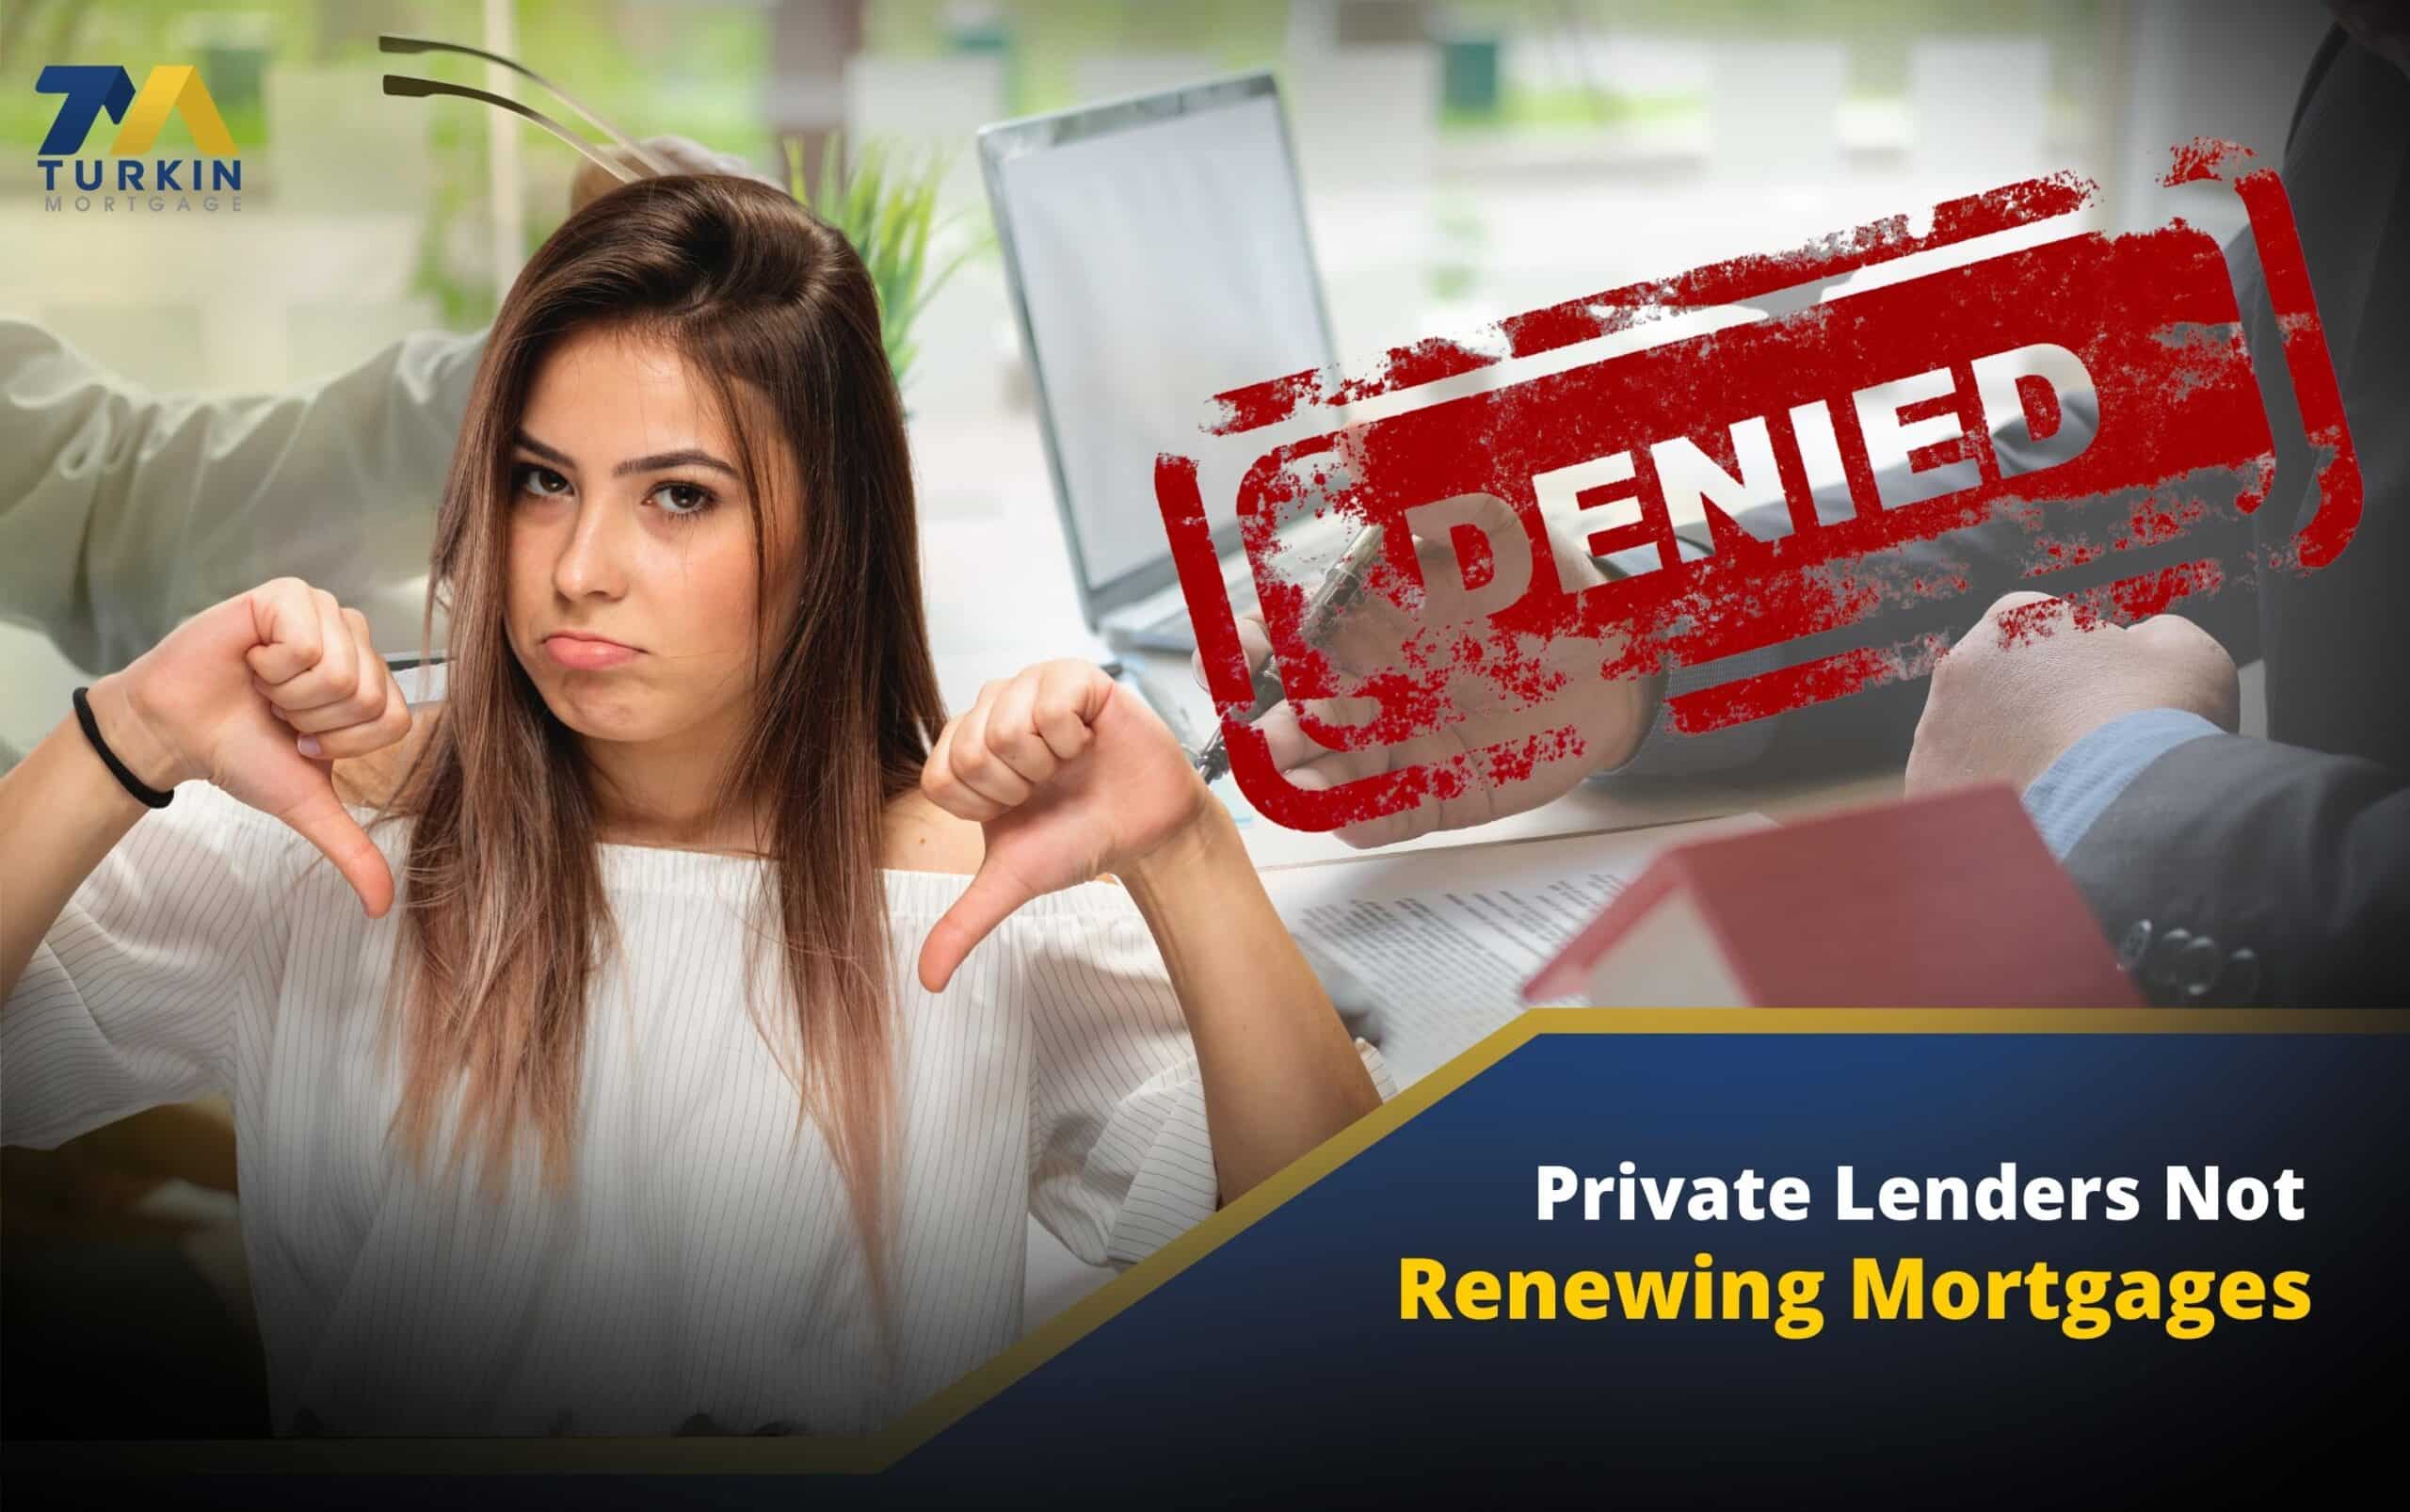 Private Lenders Not Renewing Some Mortgages